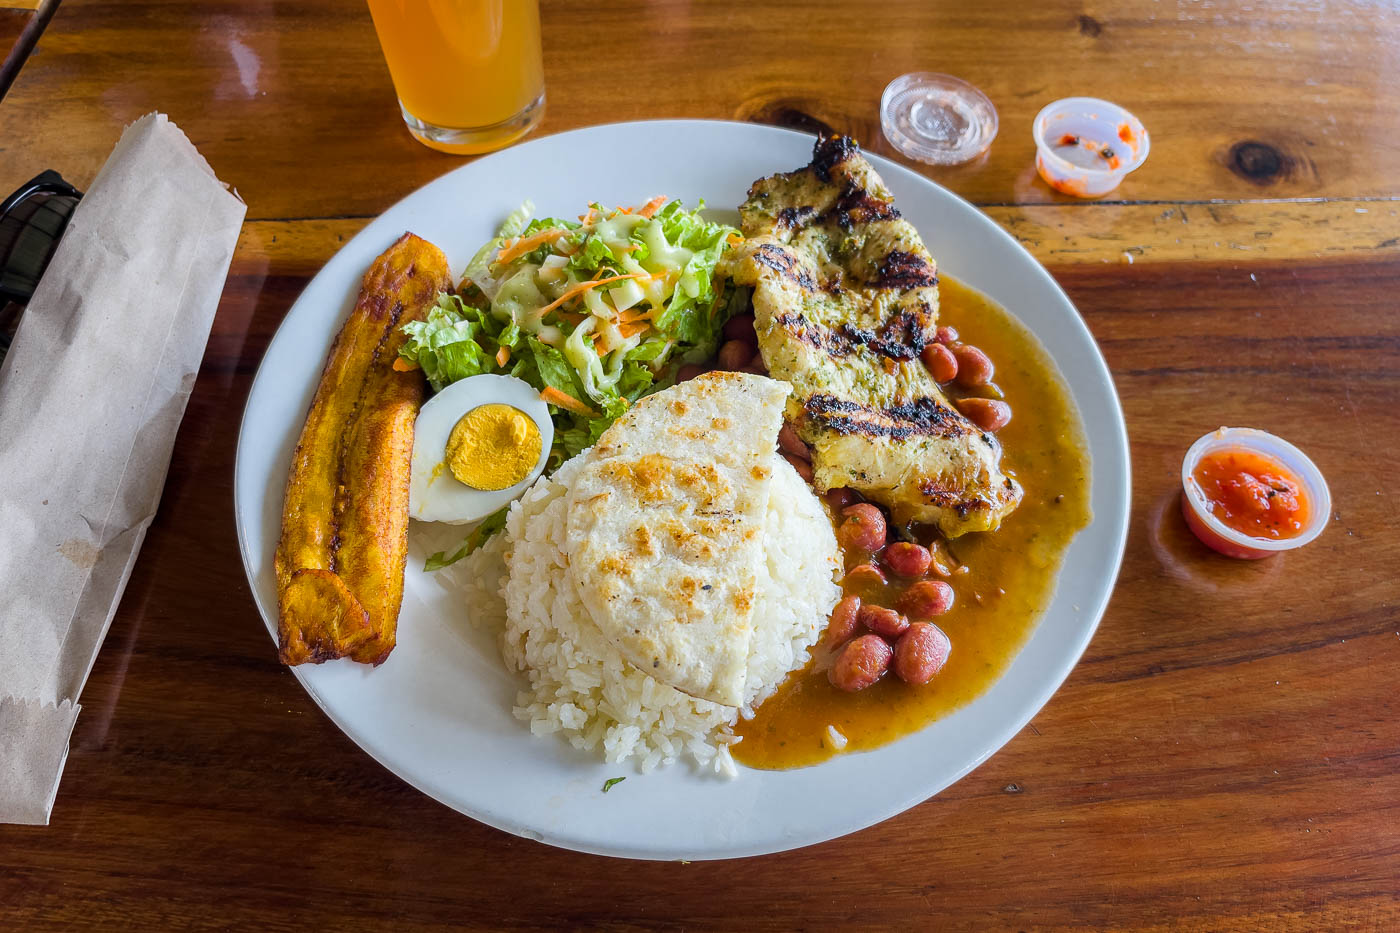 A traditional Colombia Brasa Paisa meal with rice, chicken, plantain, beans and salad.